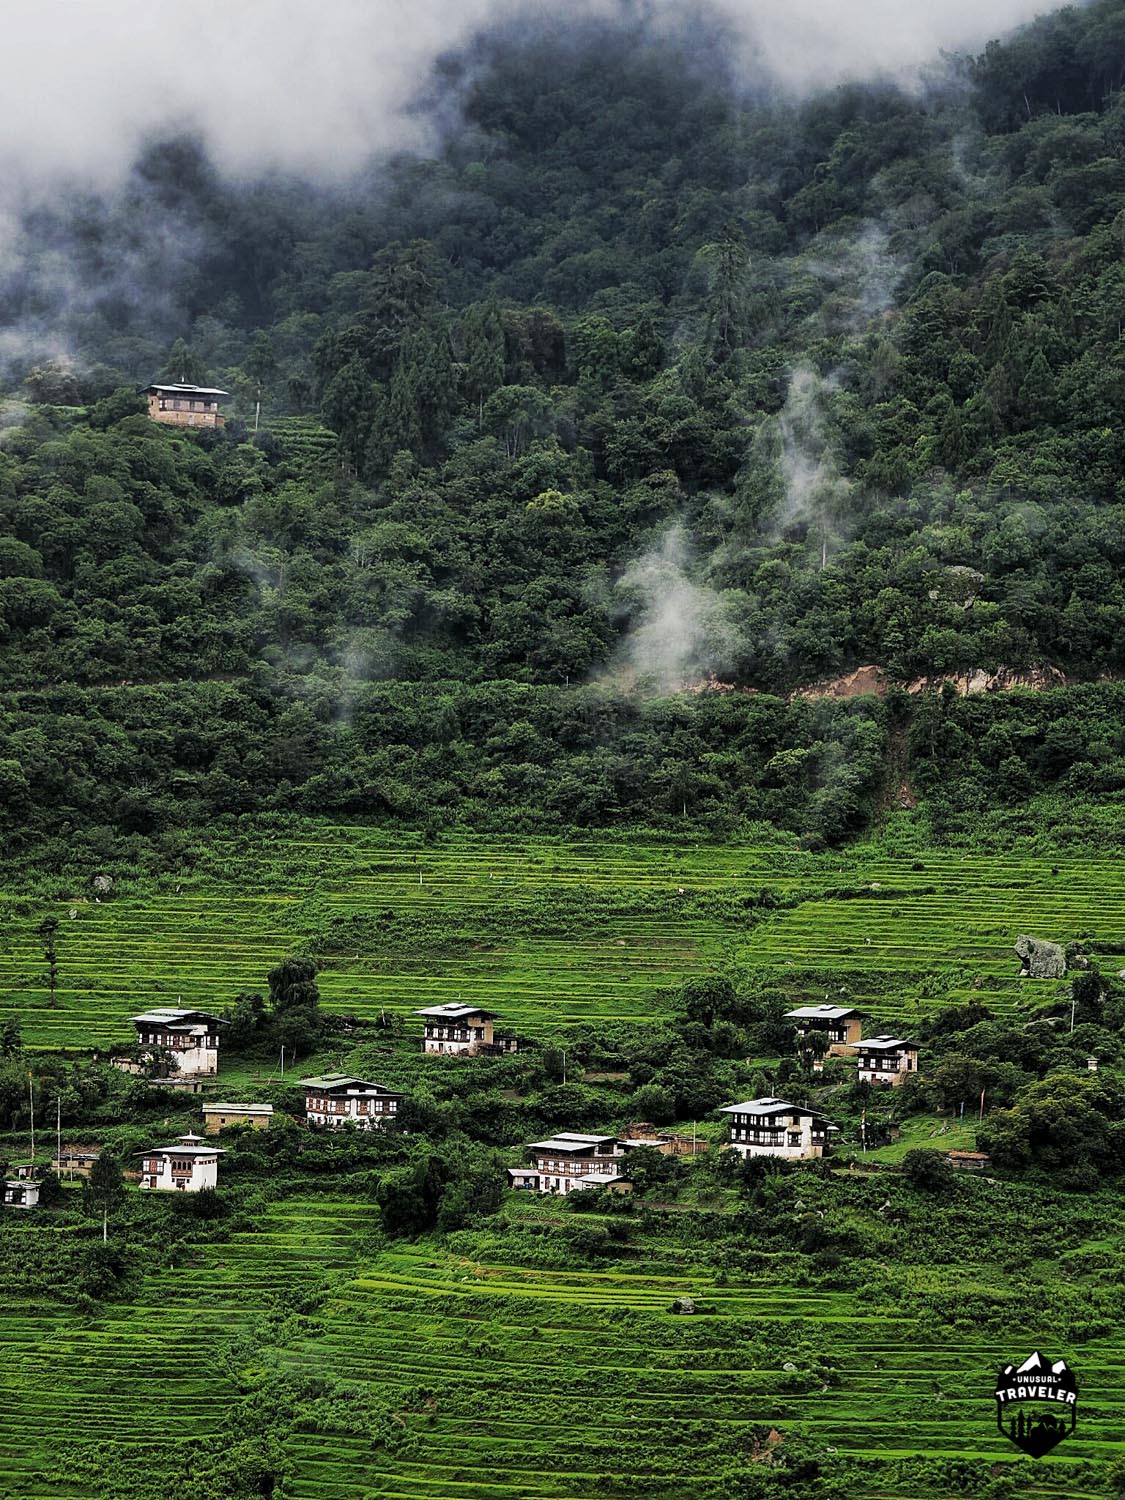 A normal village in Bhutan. So pure and green.